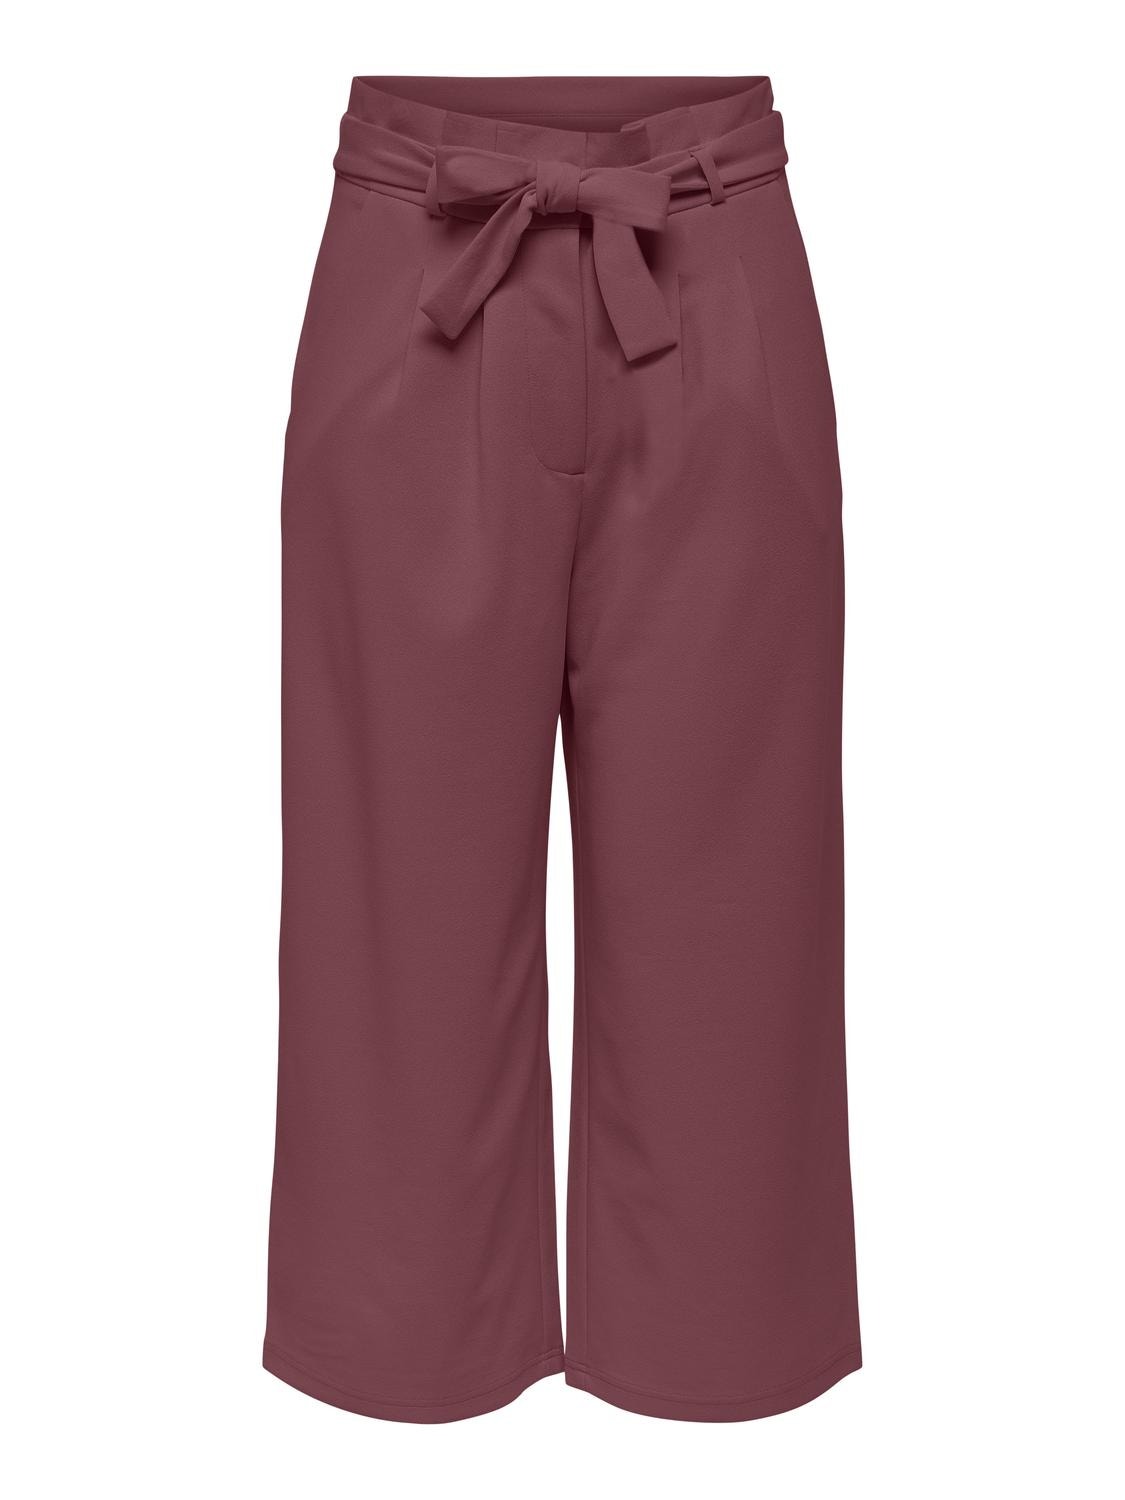 ONLY Culotte Trousers -Wild Ginger - 15205538